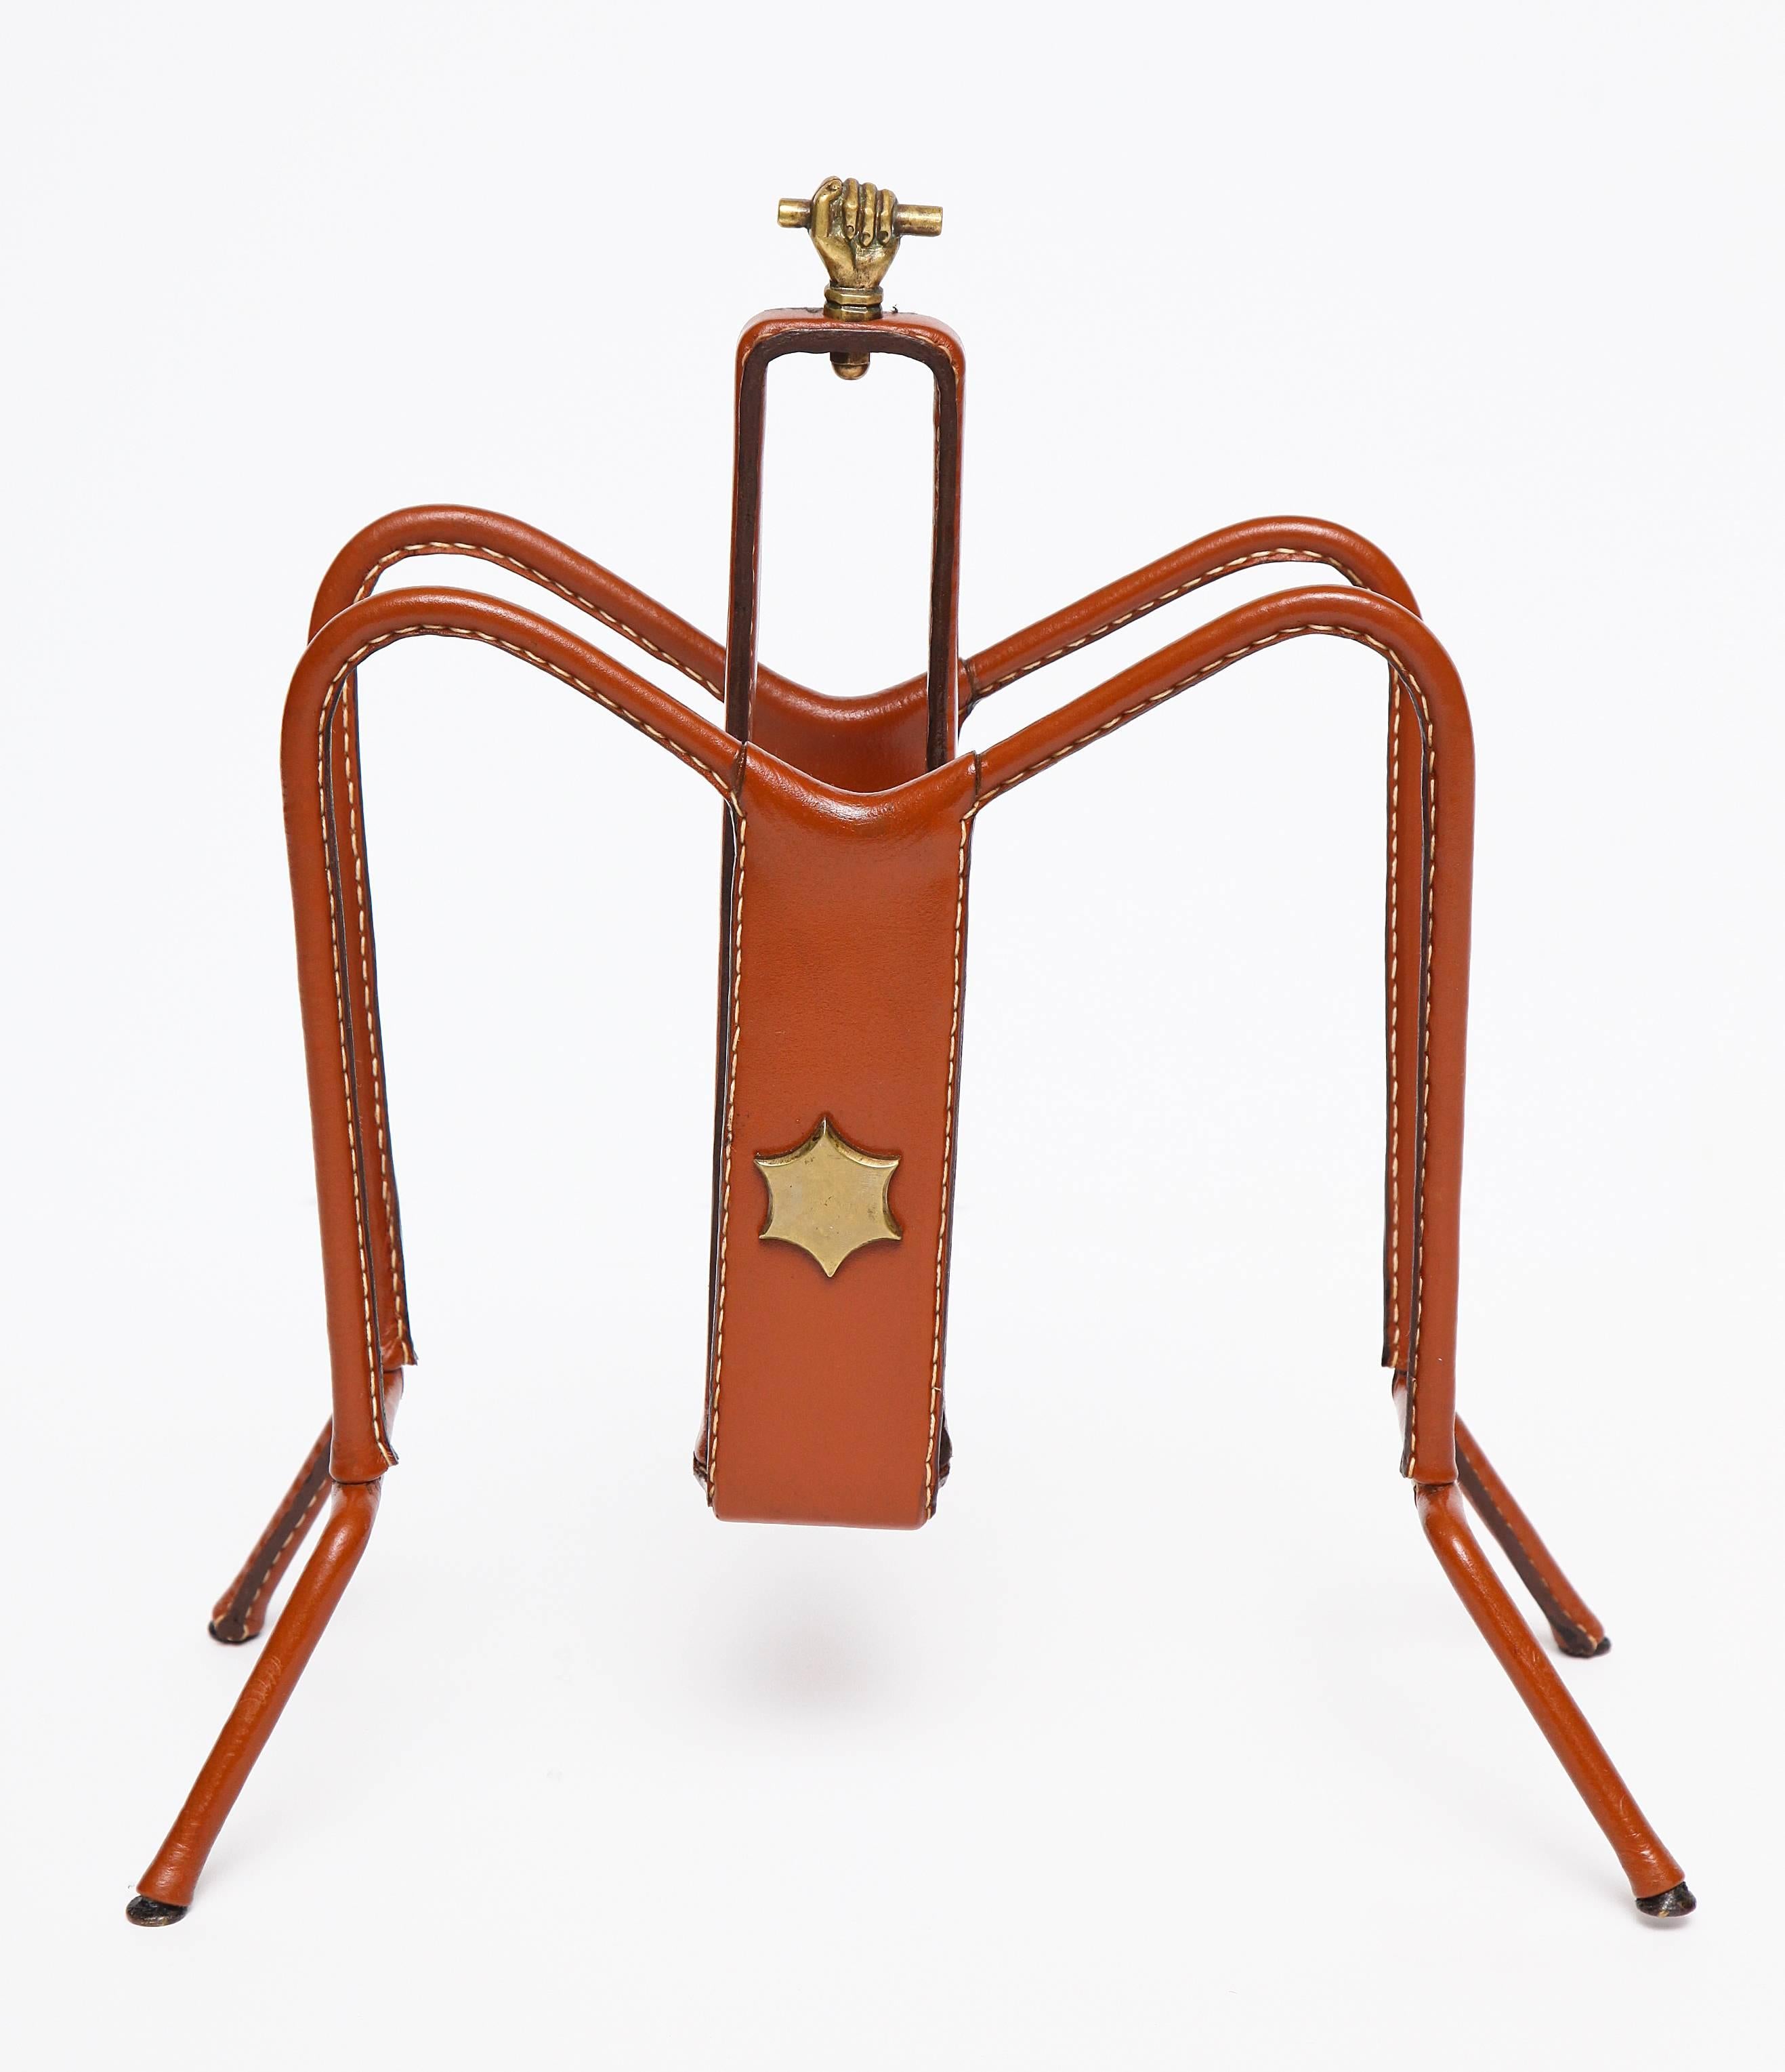 Leather and metal magazine rack by Perrier & Fils.
wrought iron, copper star and handle.

Please note that the leather stitched wrapping covering the wrought iron frame is a recent addition.

We thank Docantic for their help in providing us